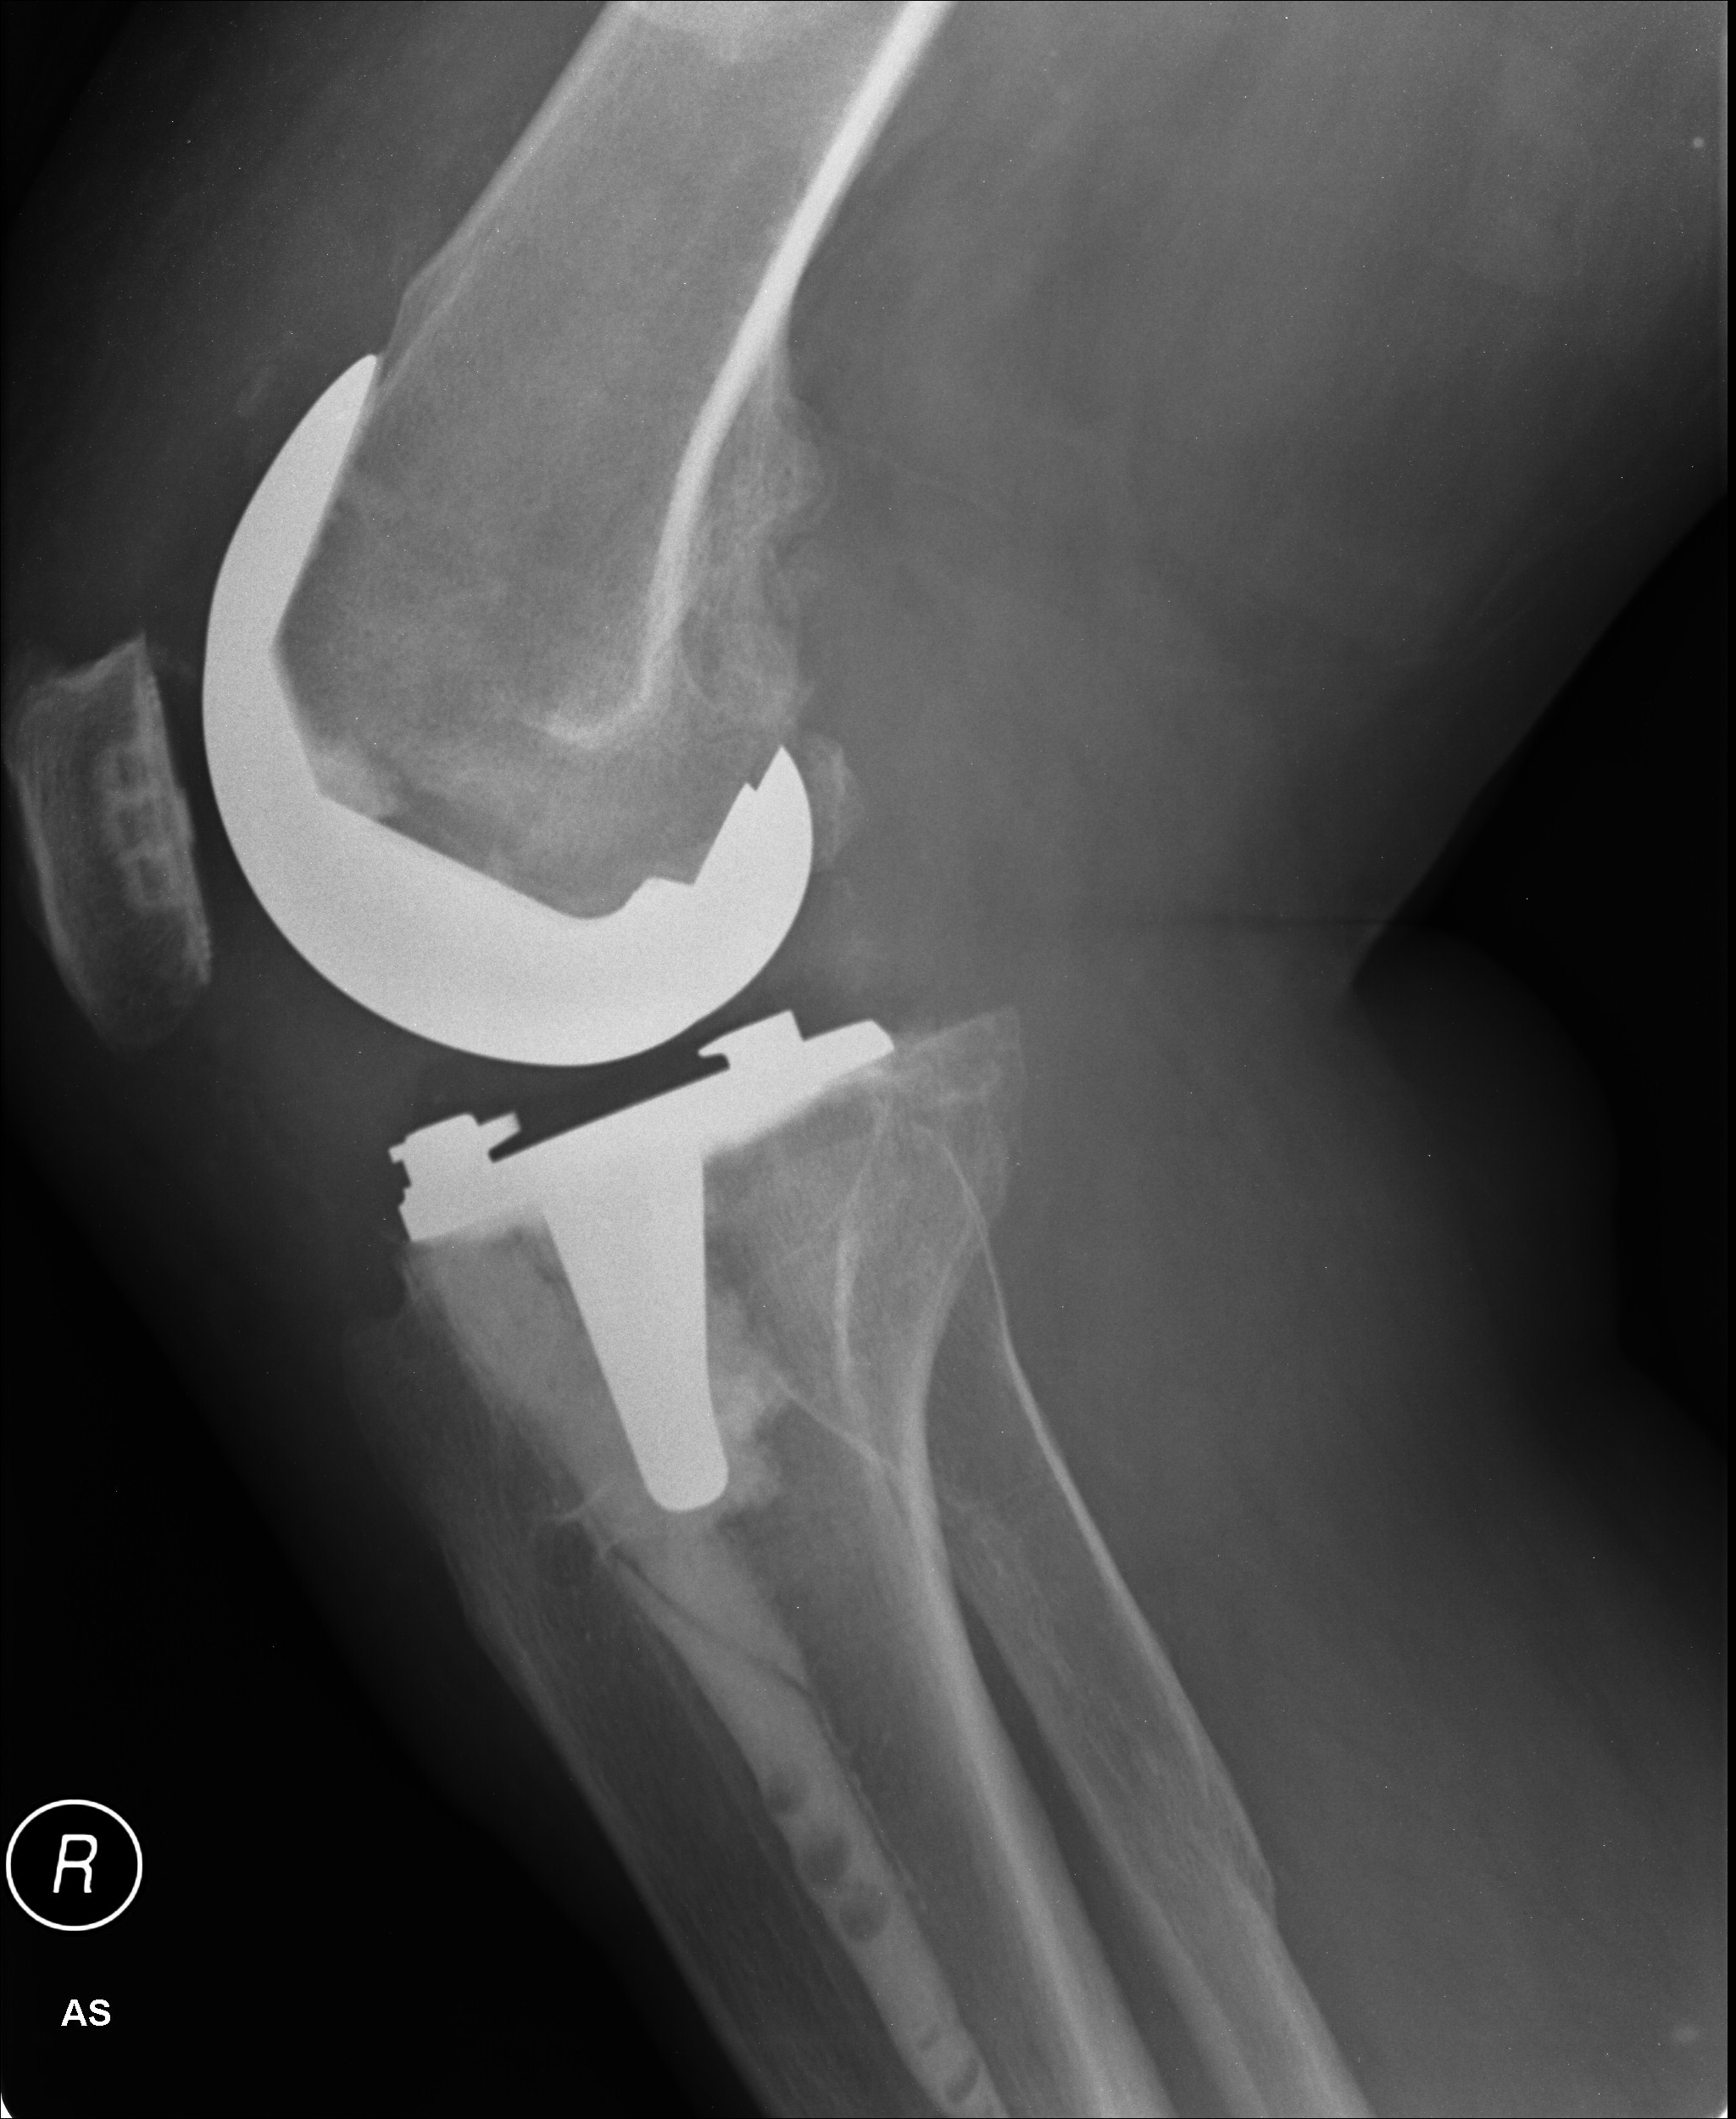 Are You At Risk for a Failed Knee Replacement Joint?